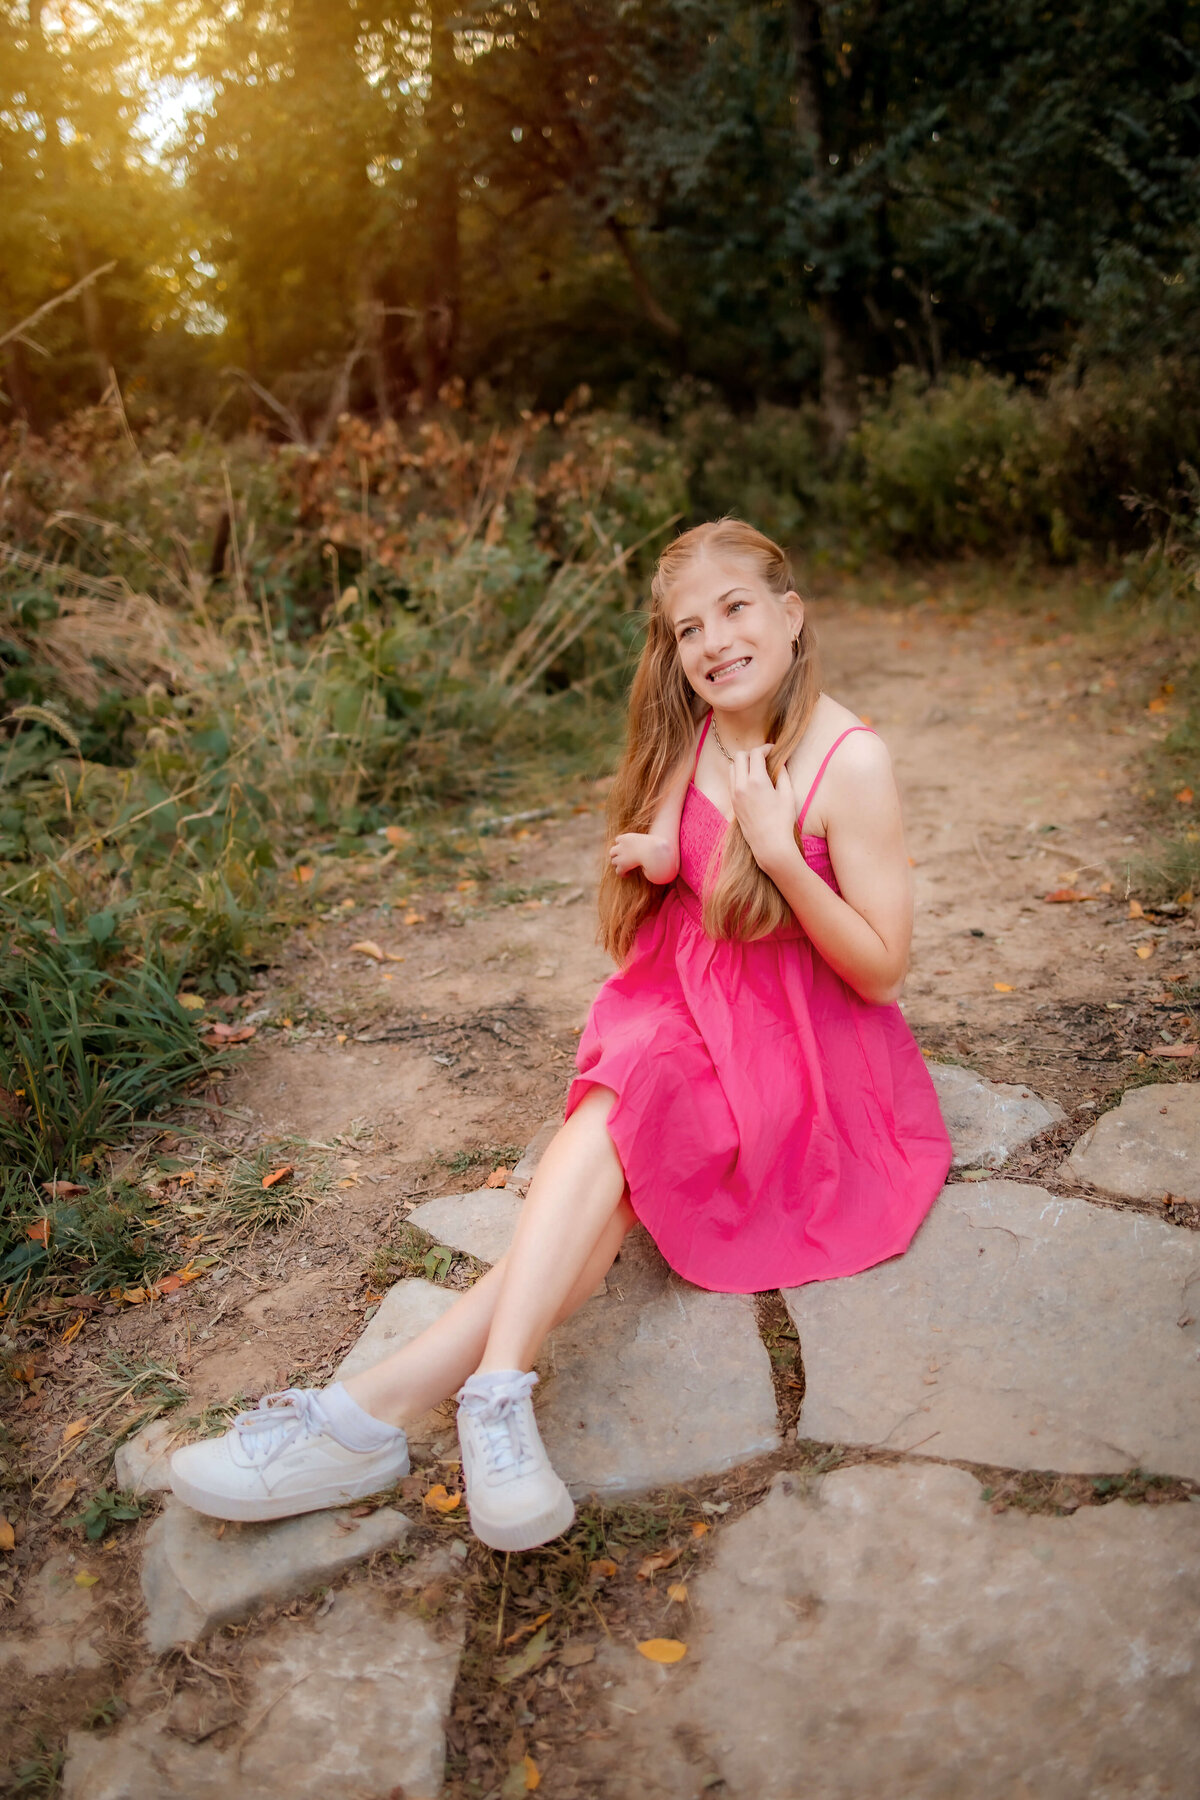 A beautiful long blonde haired girl is sitting on a natural stone trail in a pink summer dress.